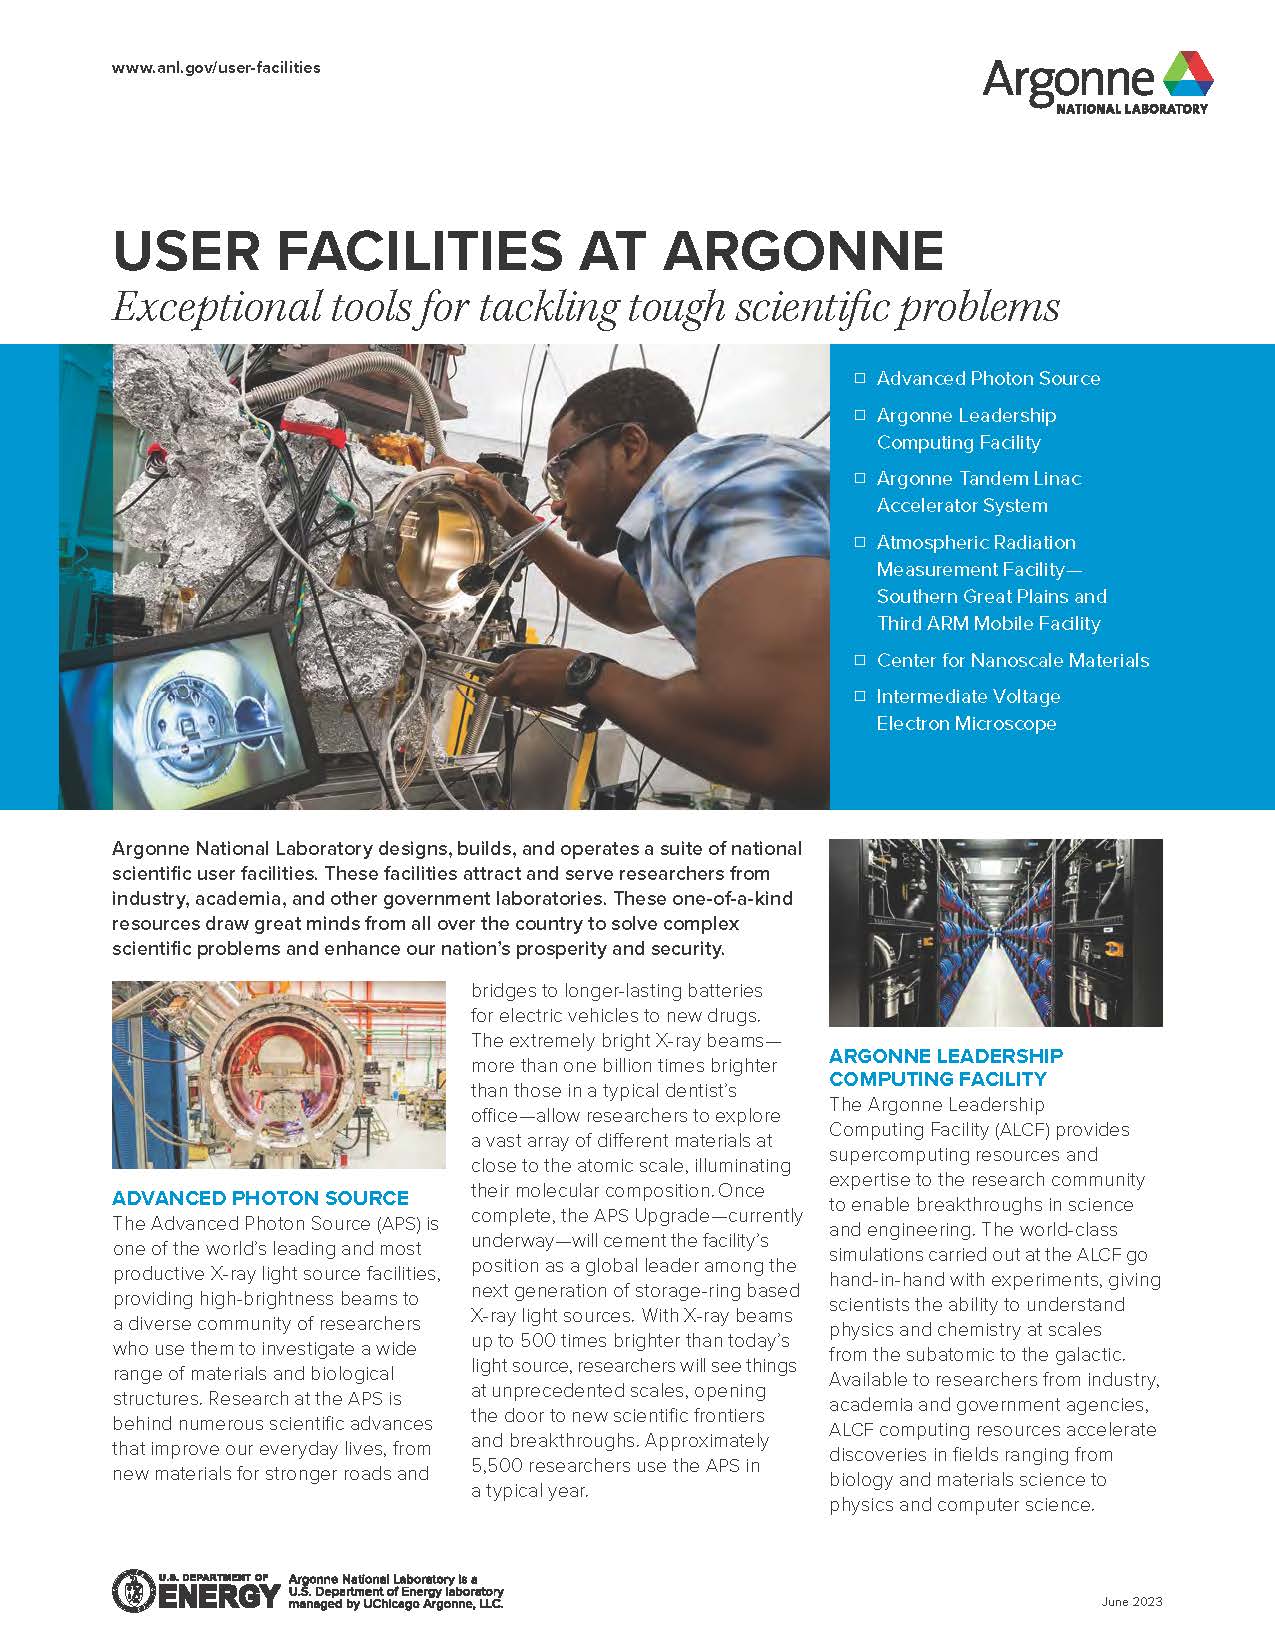 Header image of male scientist working on science equipment on factsheet for Argonne National Laboratory.